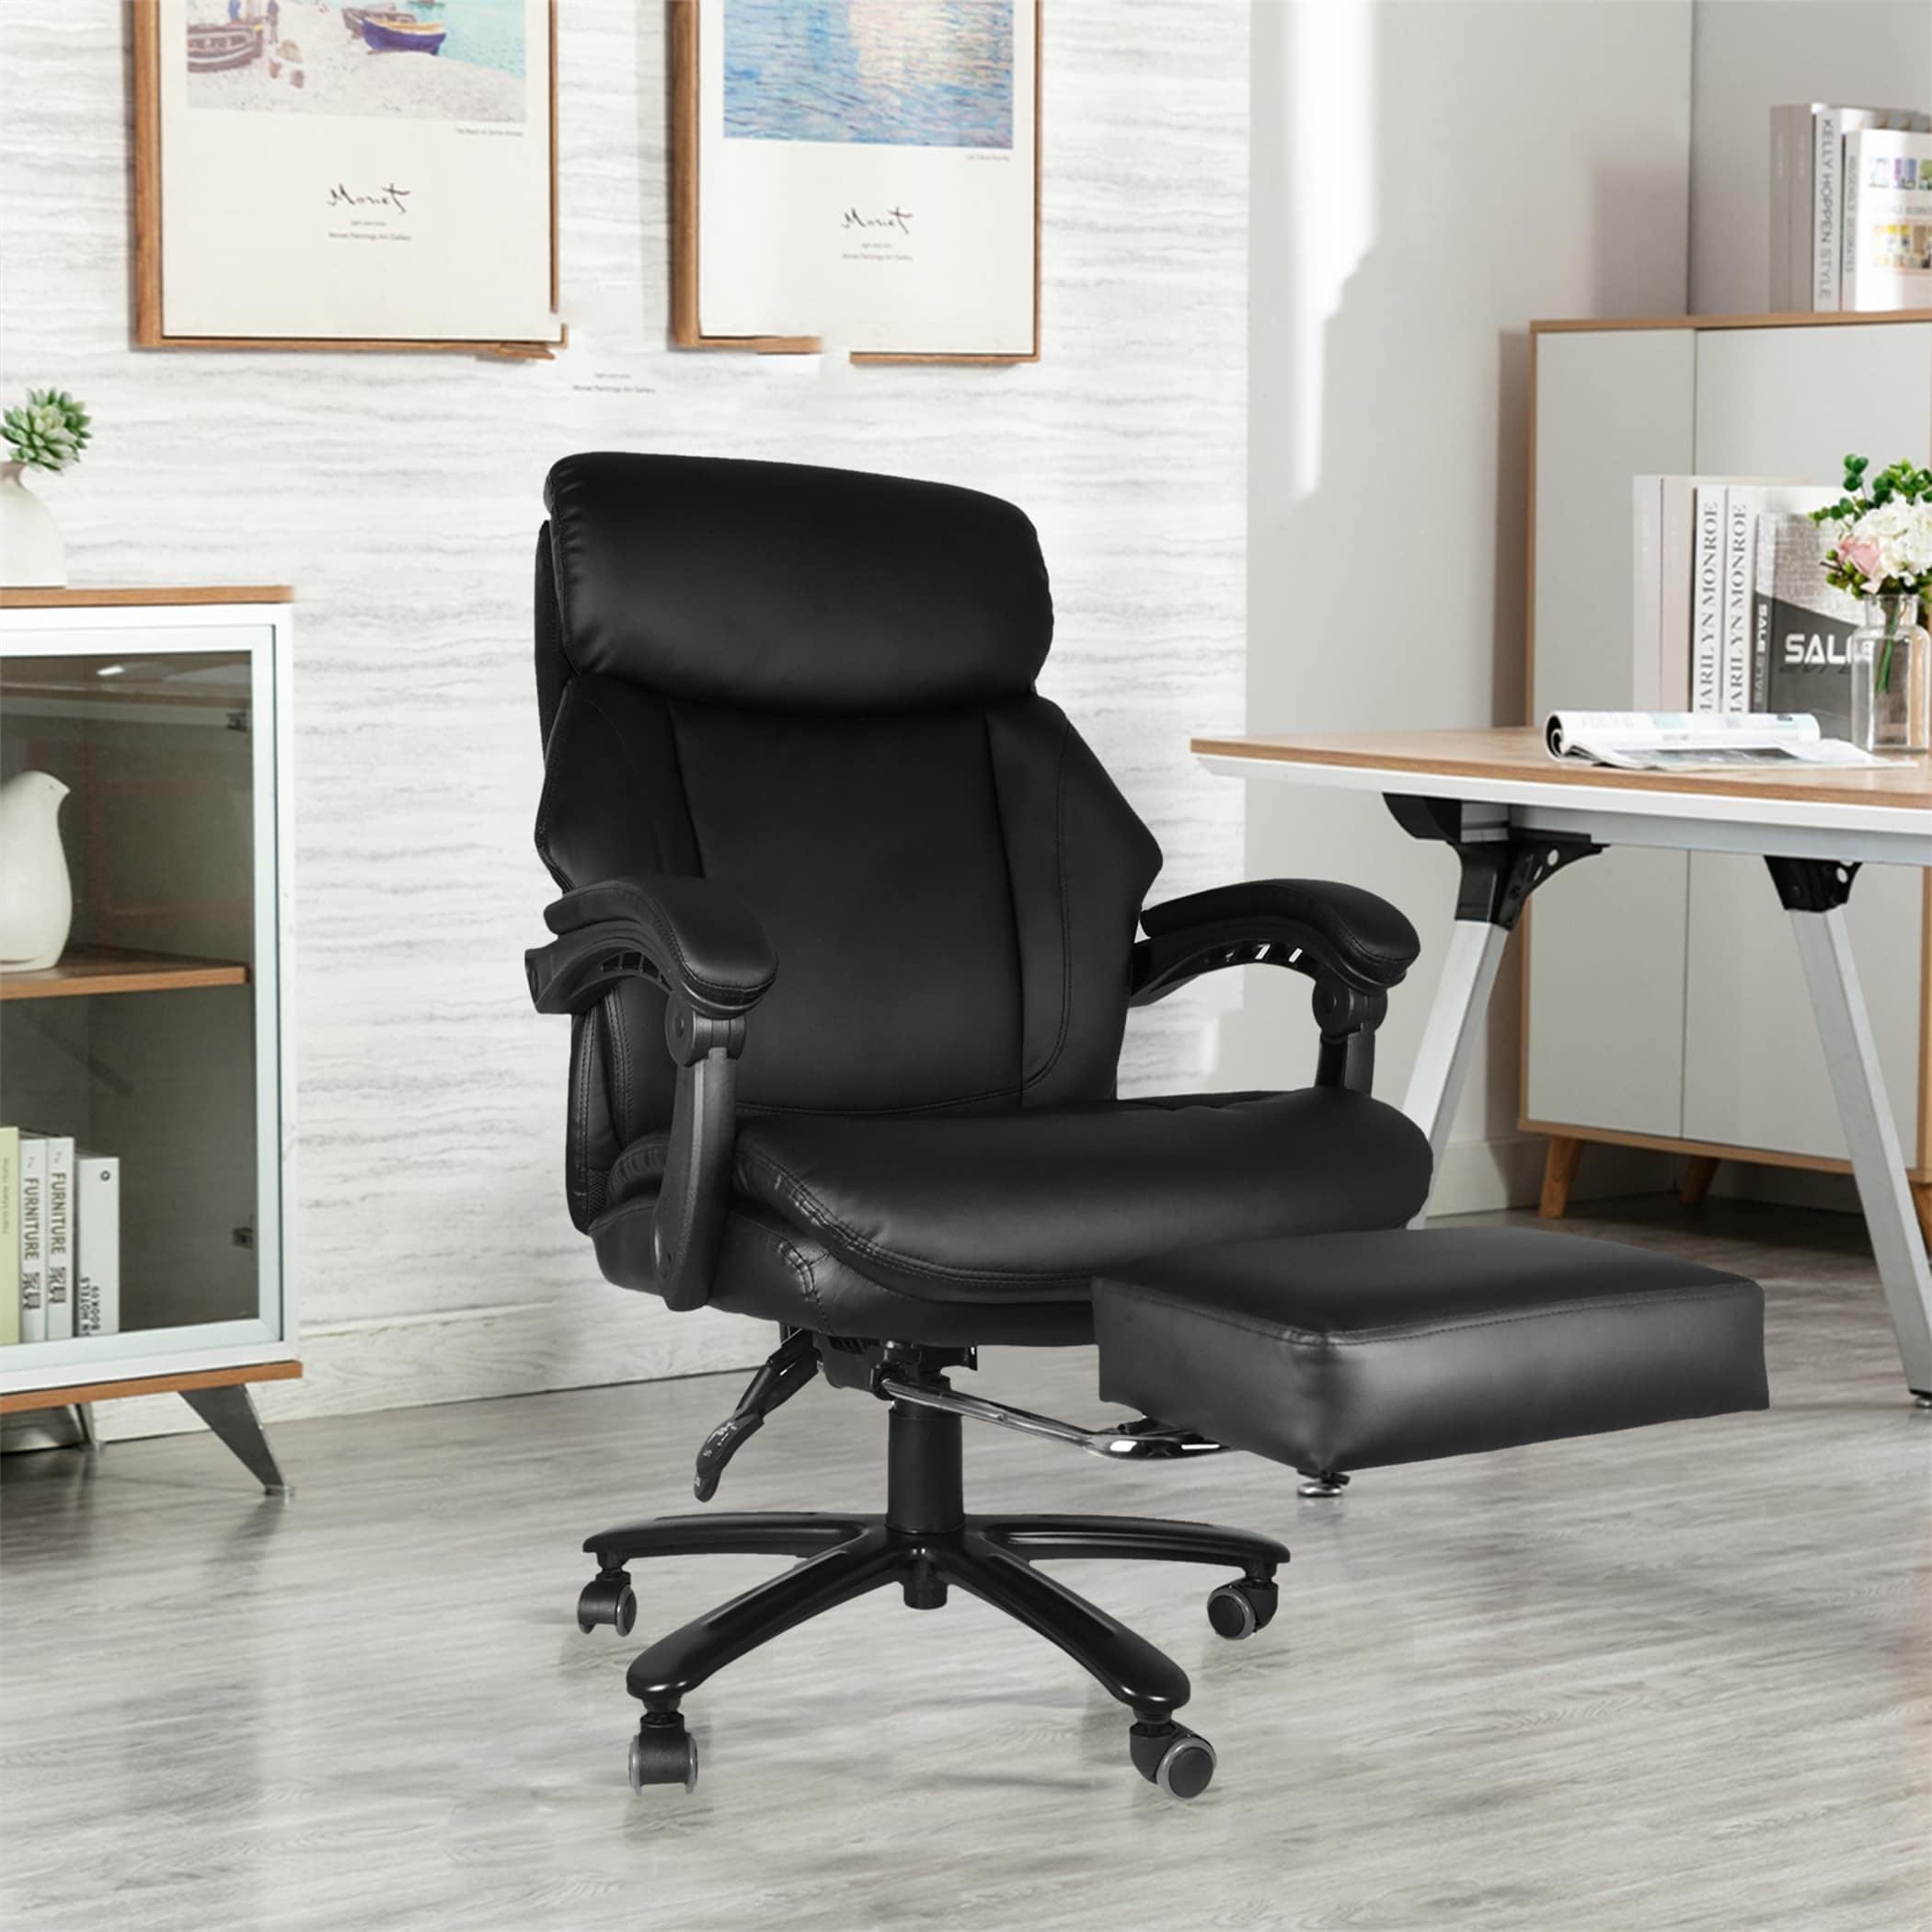 Office Chair with PU Leather Soft Cushion and Footrest Tilt Function Max 130°